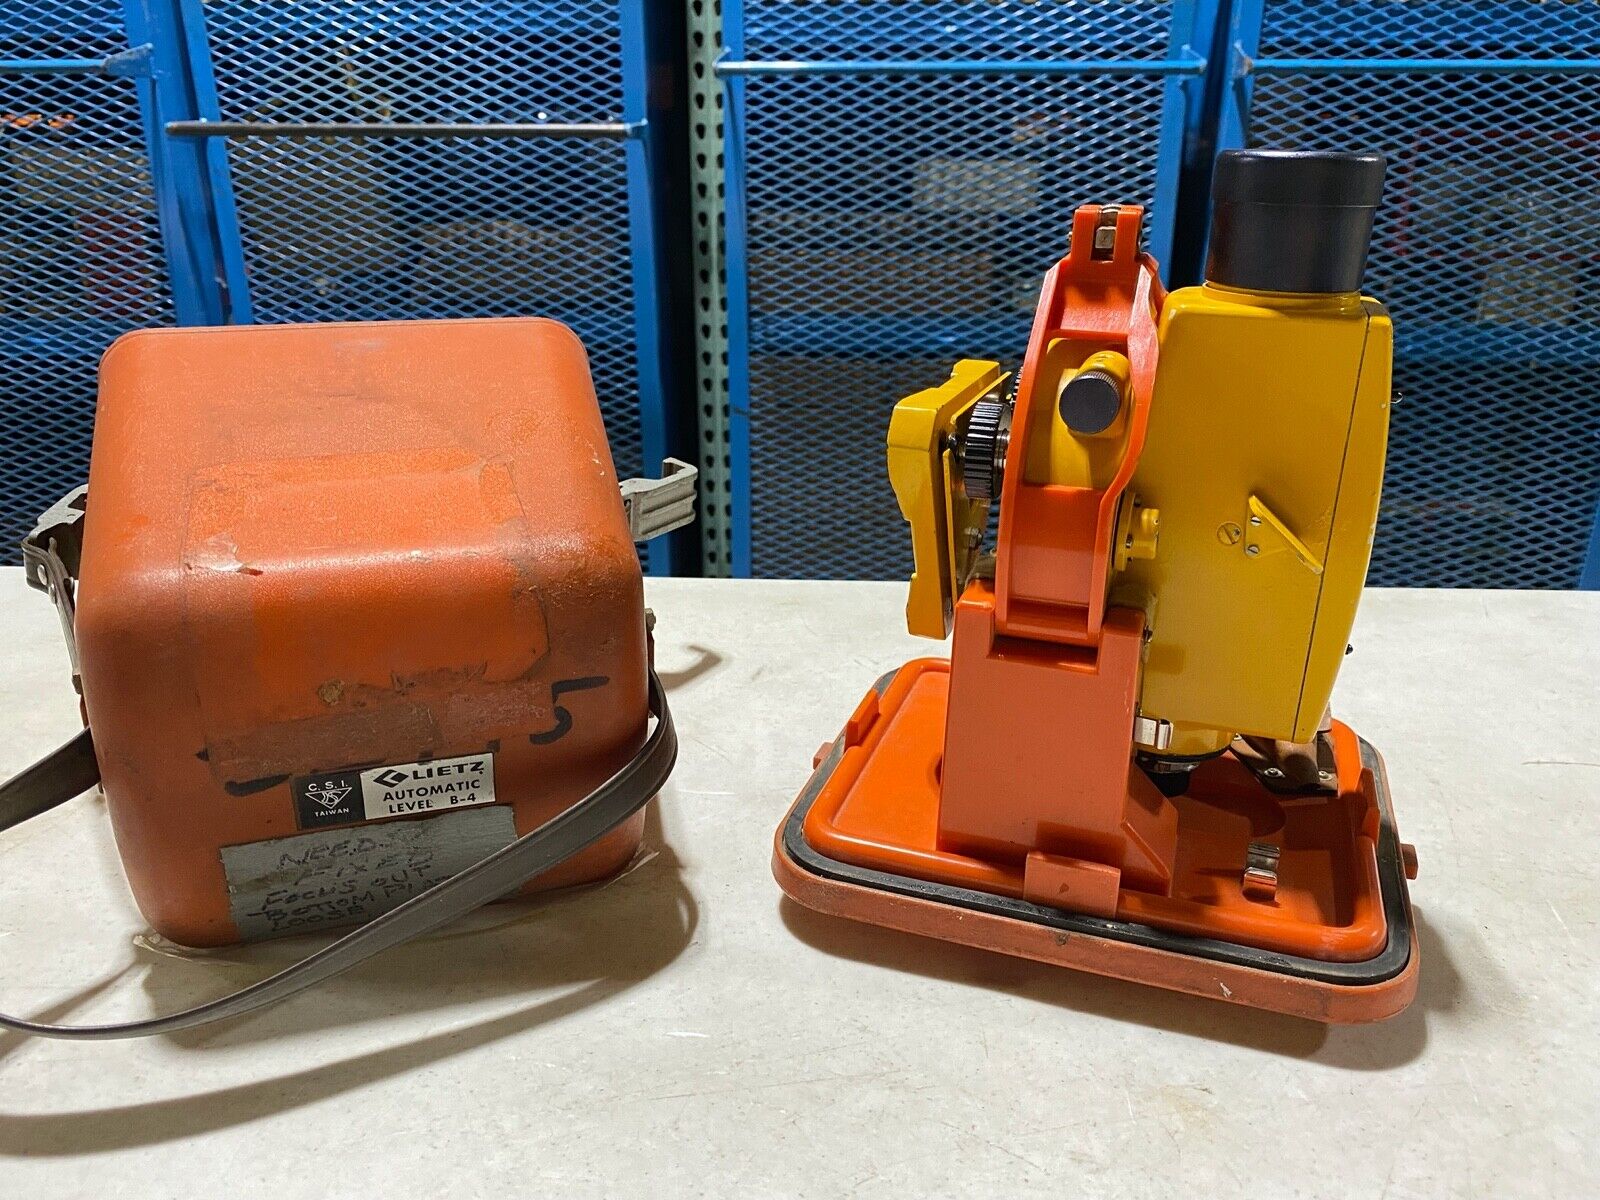 One LIETZ Automatic Survey Level B-4 with case, for parts needs a little work